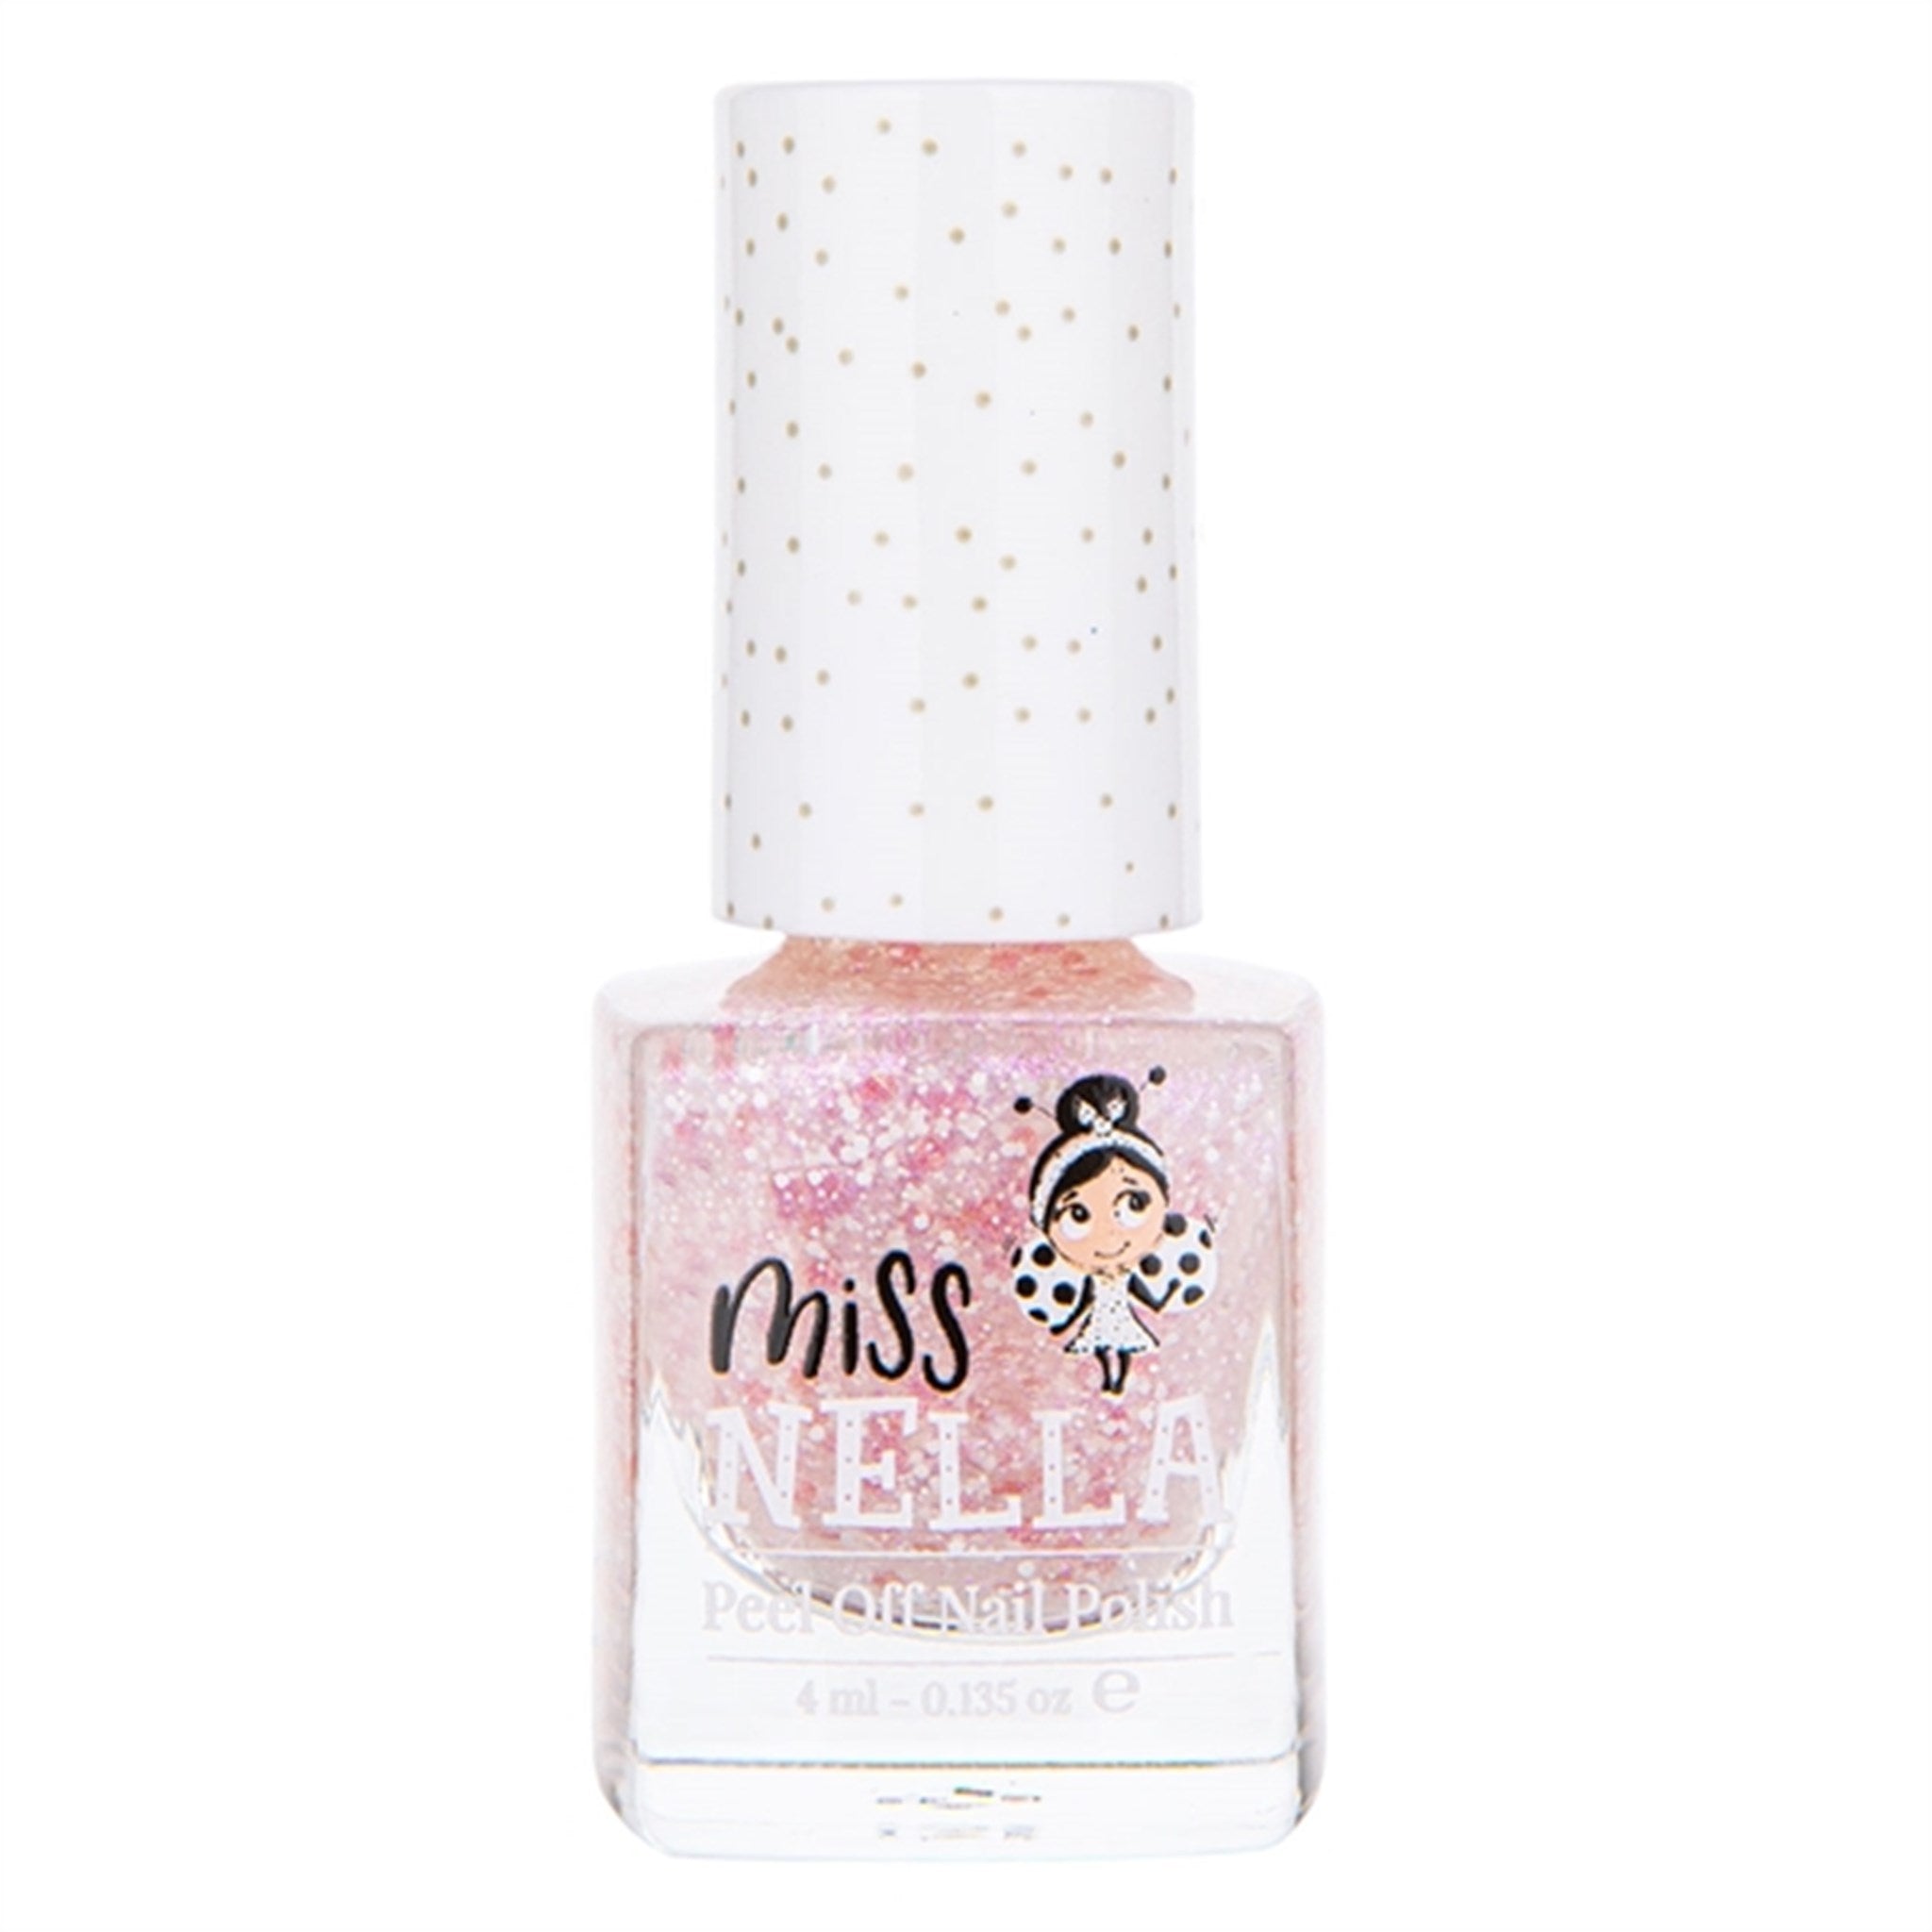 Miss Nella Nagellack Happily Ever After